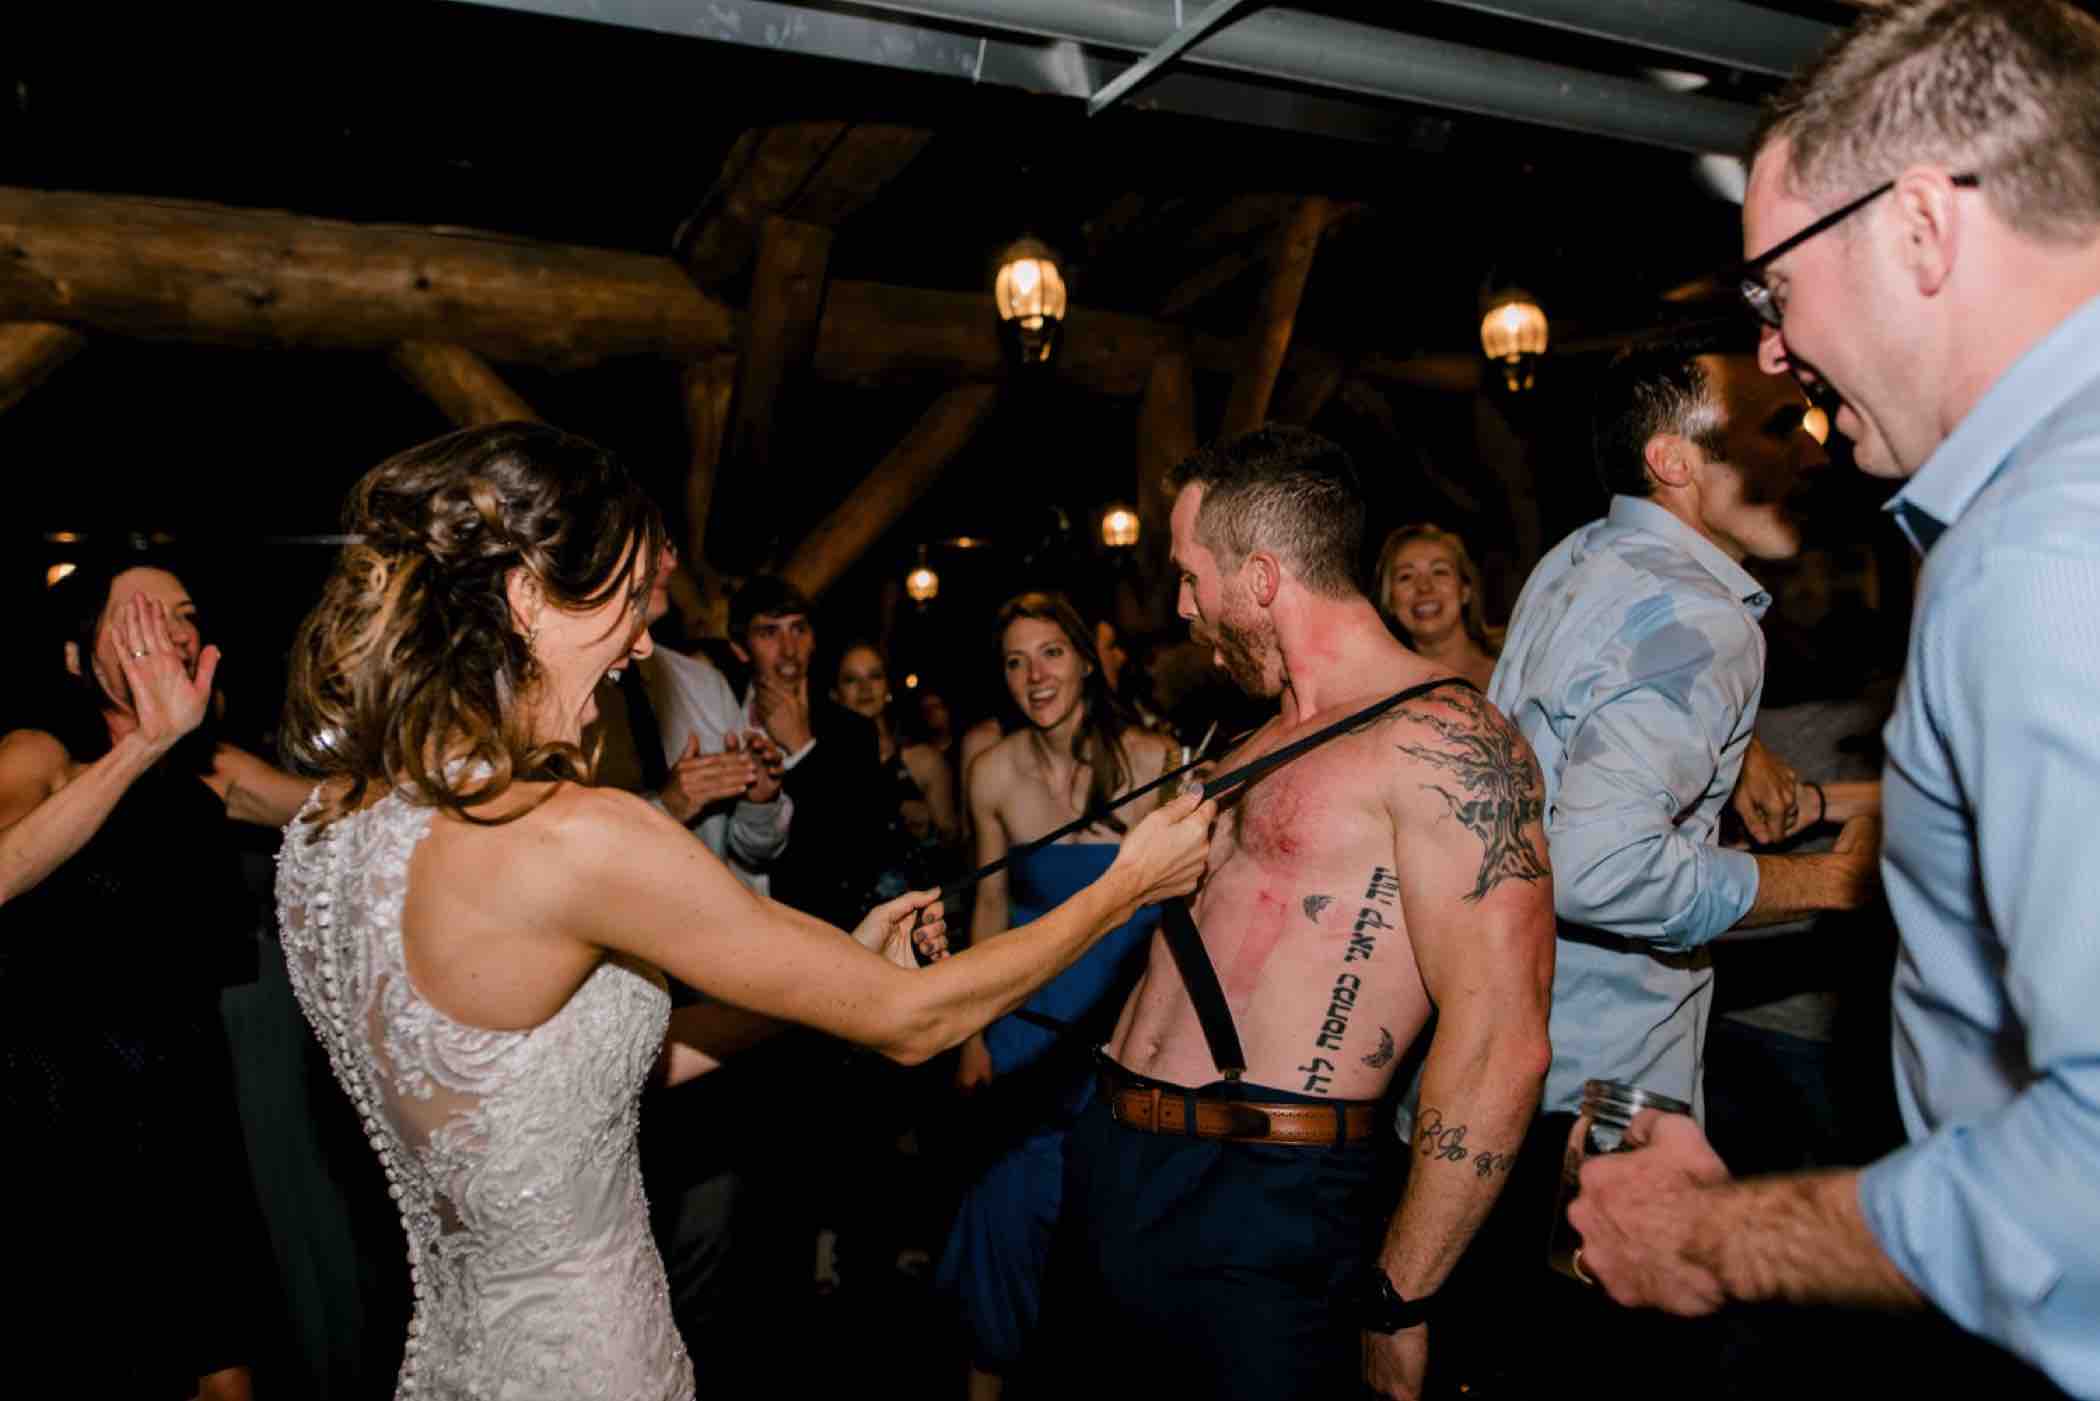 The groom surprised the bride by returning shirtless to his wedding reception at Piney River Ranch in Vail, Colorado. Photo by Ali and Garrett, Romantic, Adventurous, Nostalgic Wedding Photographers.